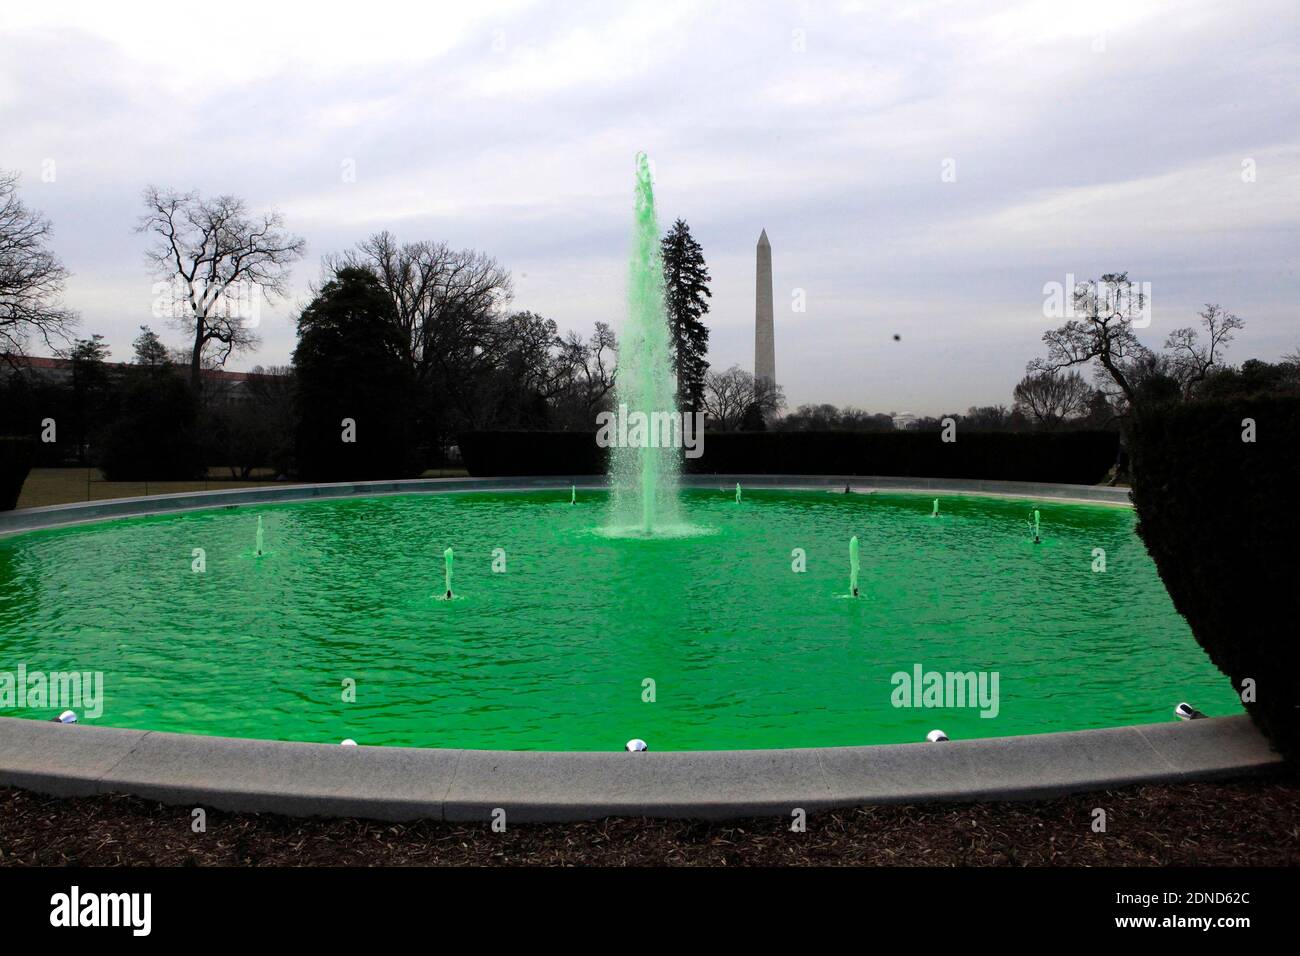 For St. Patrick's Day a green dye was added to the water of the fountain on the South Lawn of the White House in Washington, DC, USA, on March 17, 2015. Photo by Dennis Brack/Pool/ABACAPRESS.COM Stock Photo